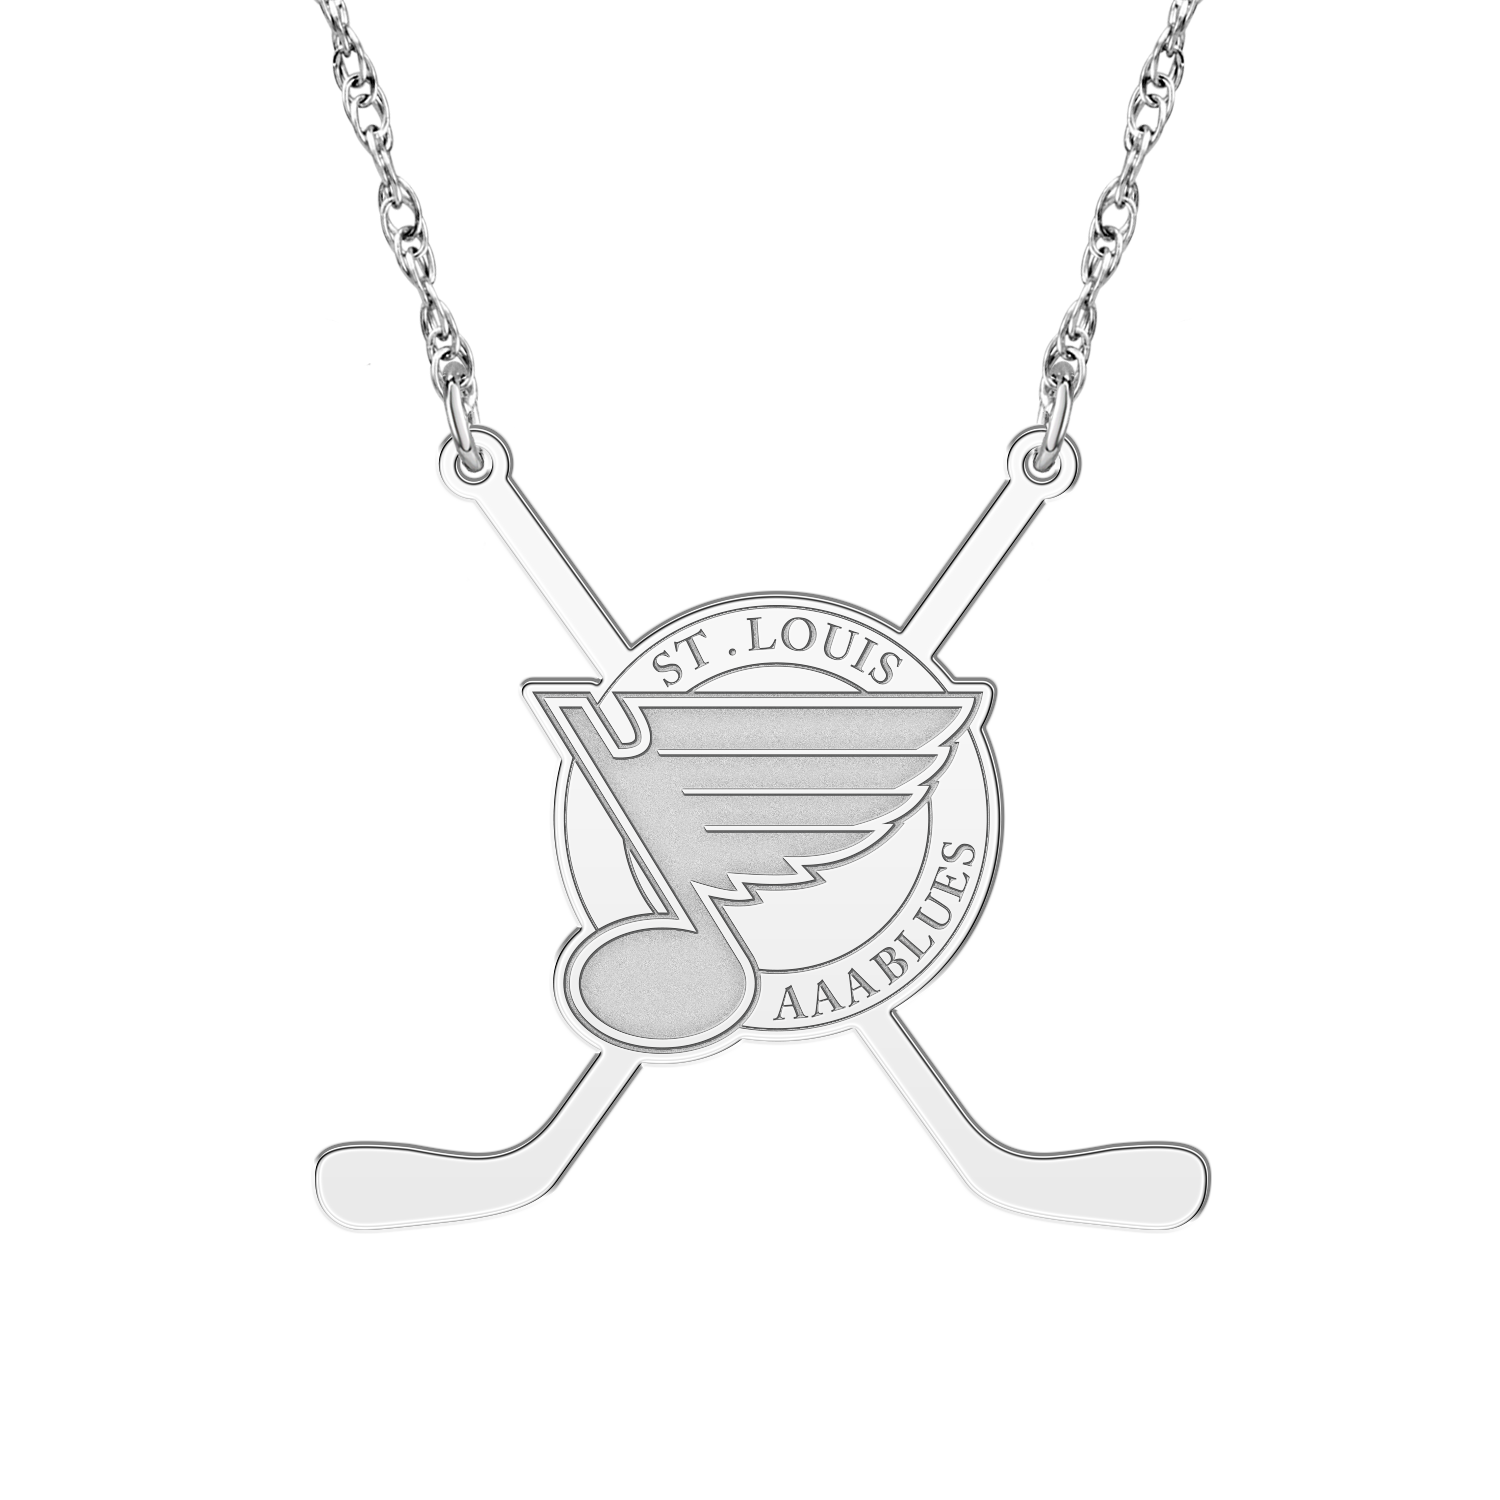 St Louis Blues Hockey Necklace 